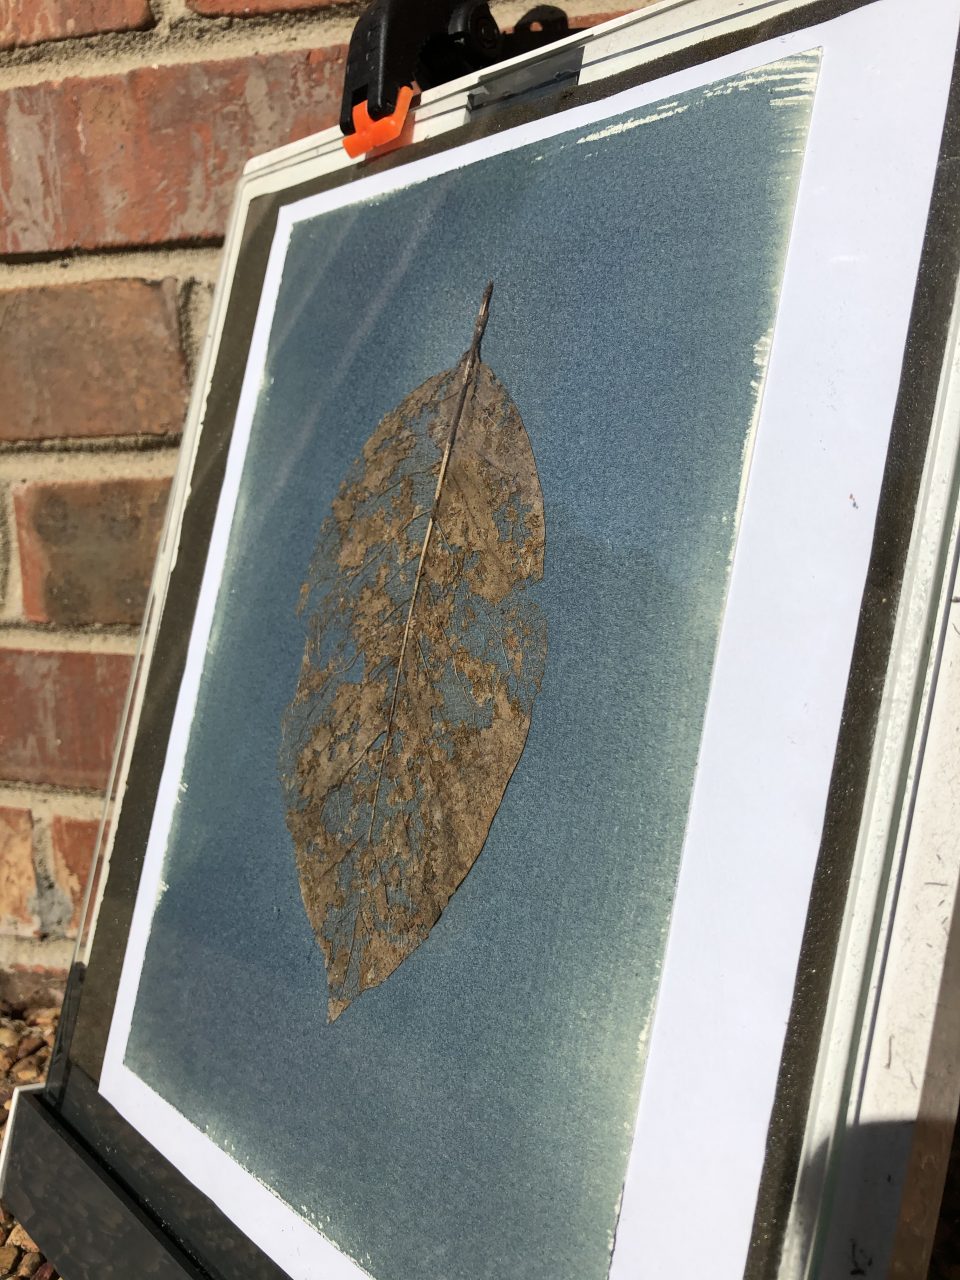 Watching my cyanotype leaf print develop in the sun. I left it in direct sunlight for about 3 - 4 minutes.